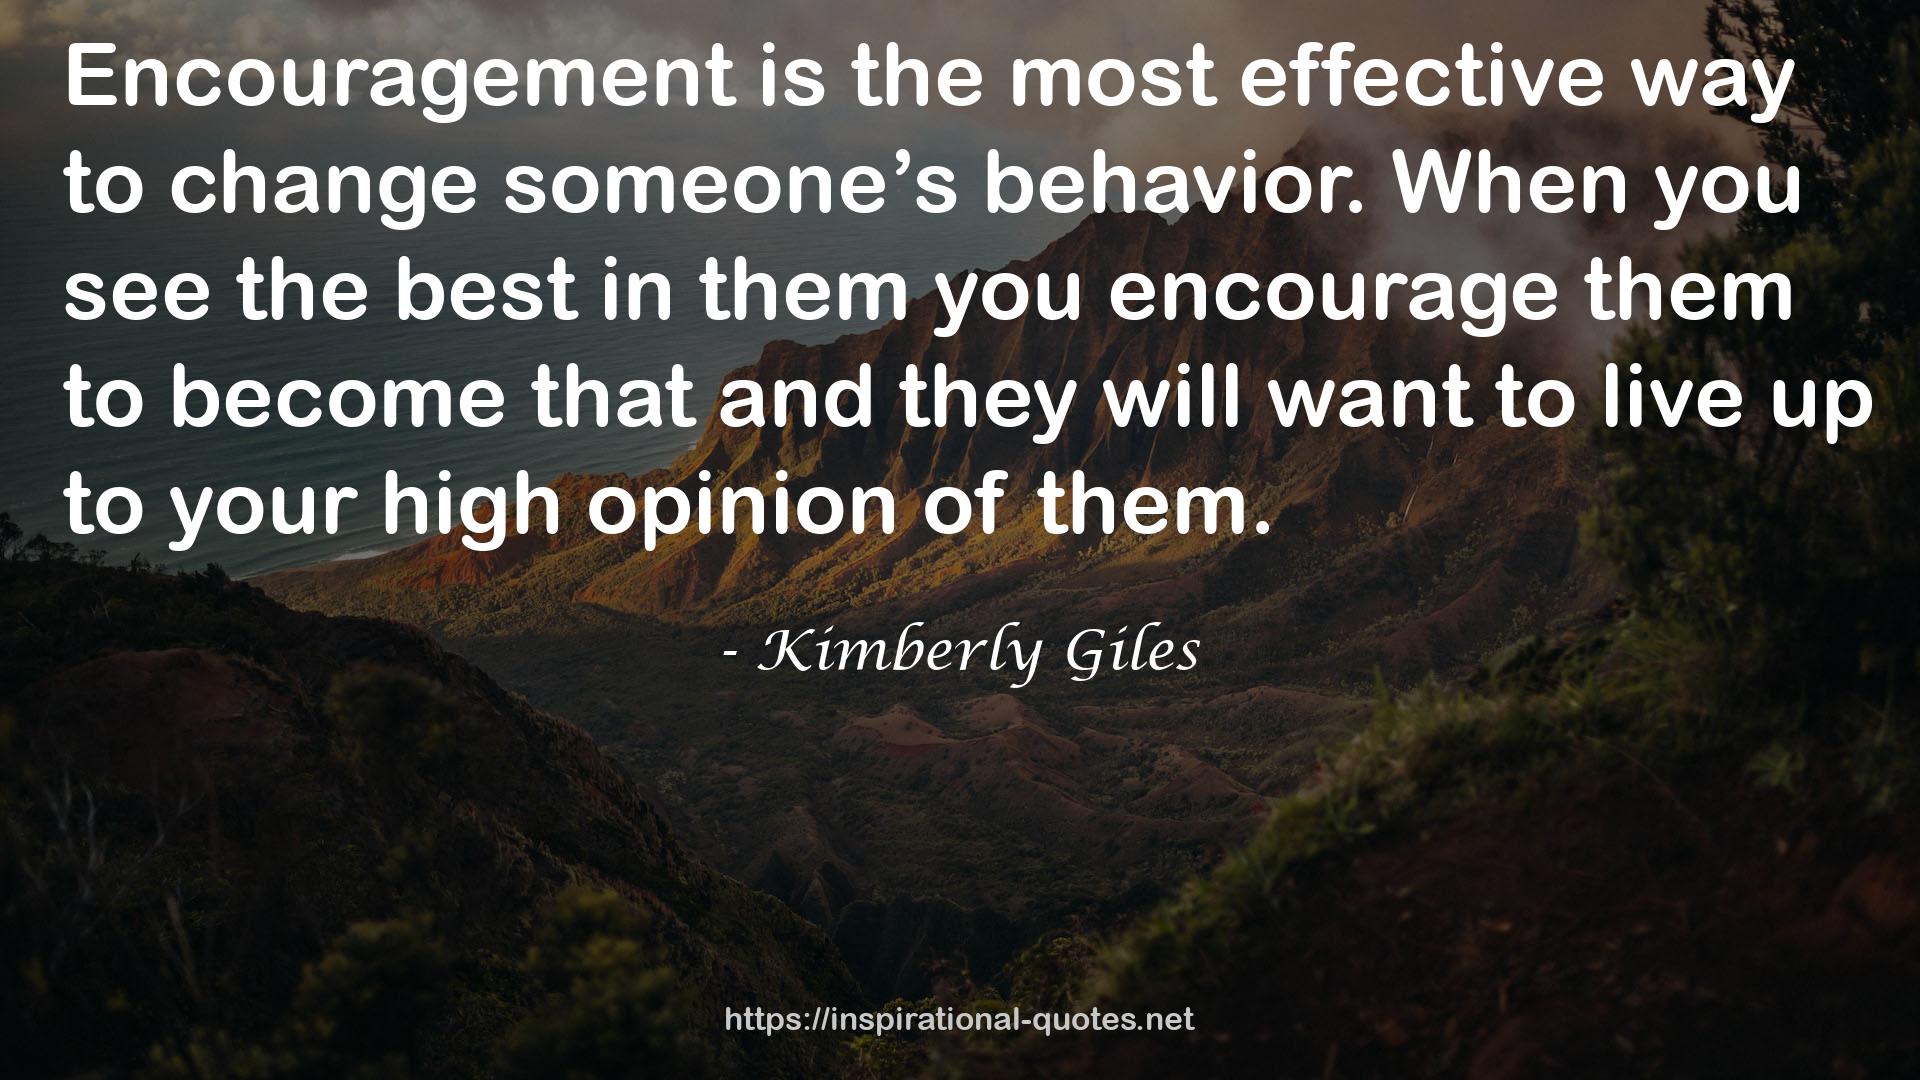 Kimberly Giles QUOTES